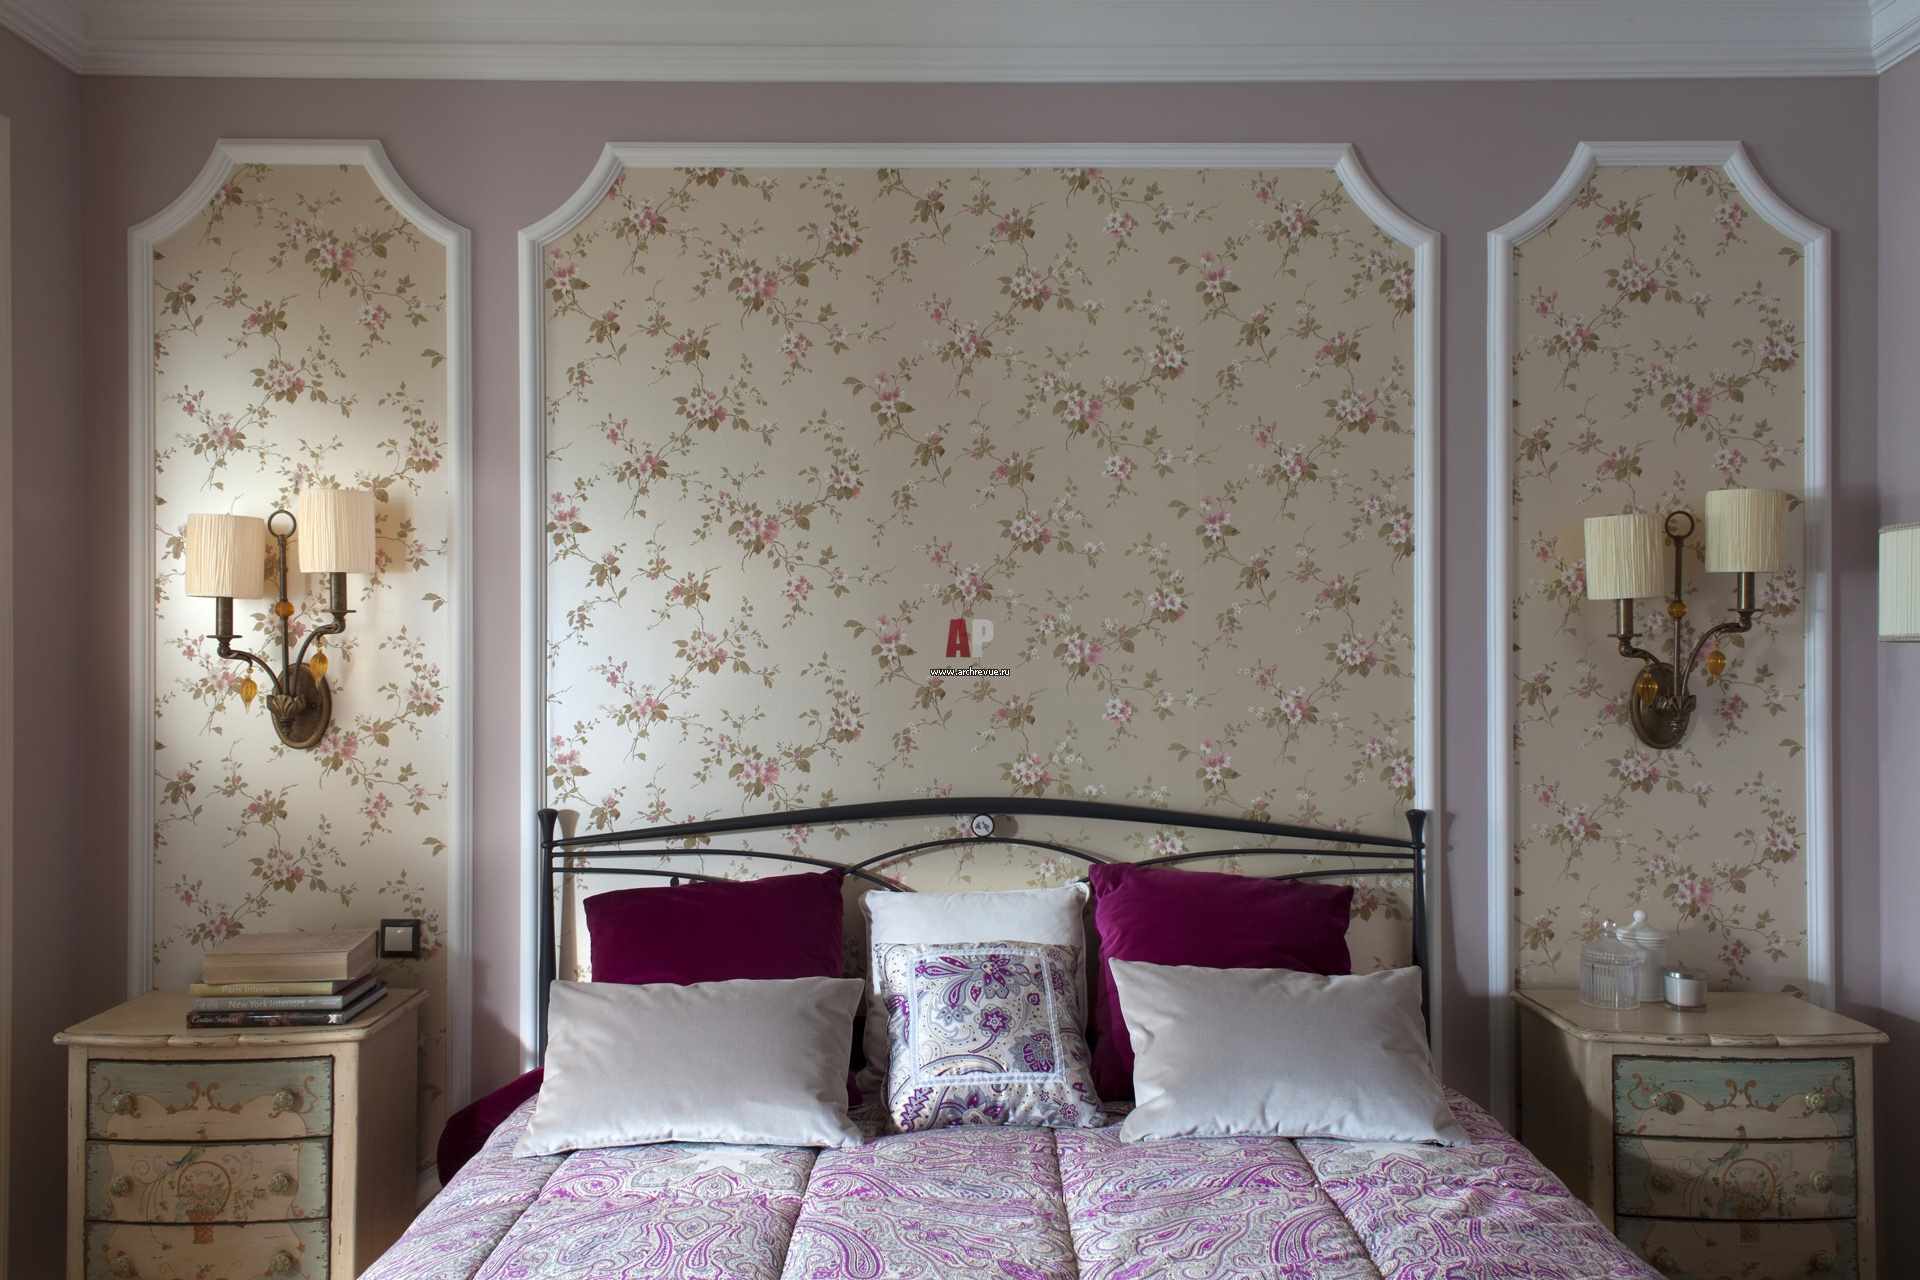 option of unusual decoration of the style of walls in the bedroom